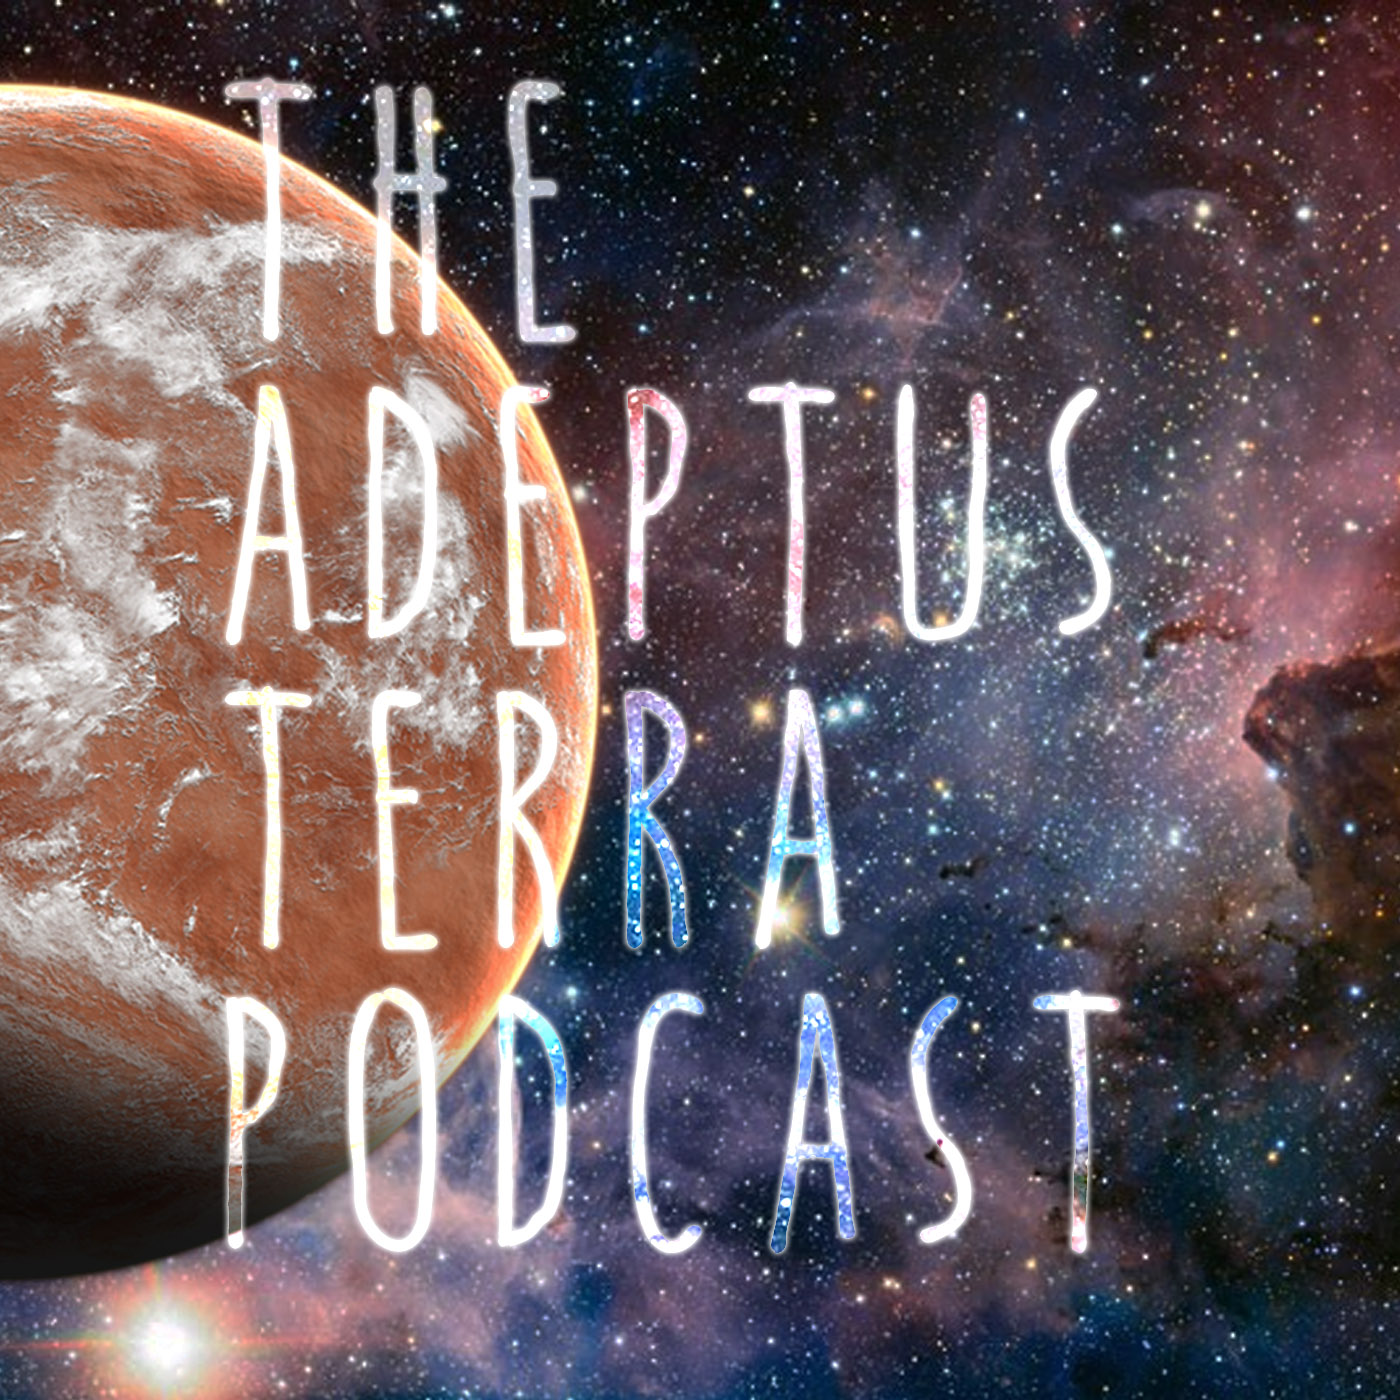 The Adeptus Terra Podcast Episode 32 'Rolling with the space Fishes'